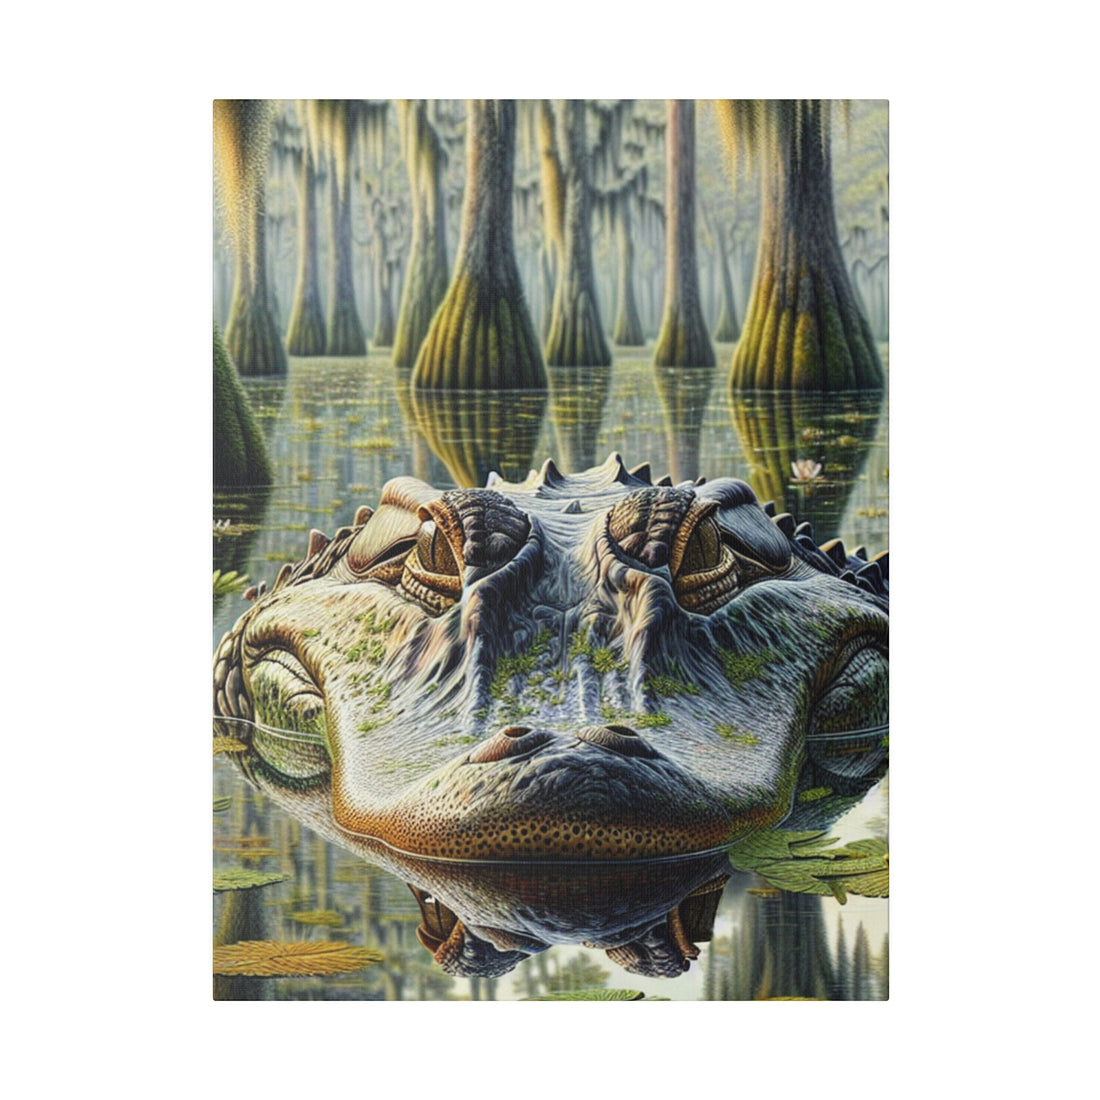 "AlligArtified - Exceptional Alligator Canvas Wall Art"